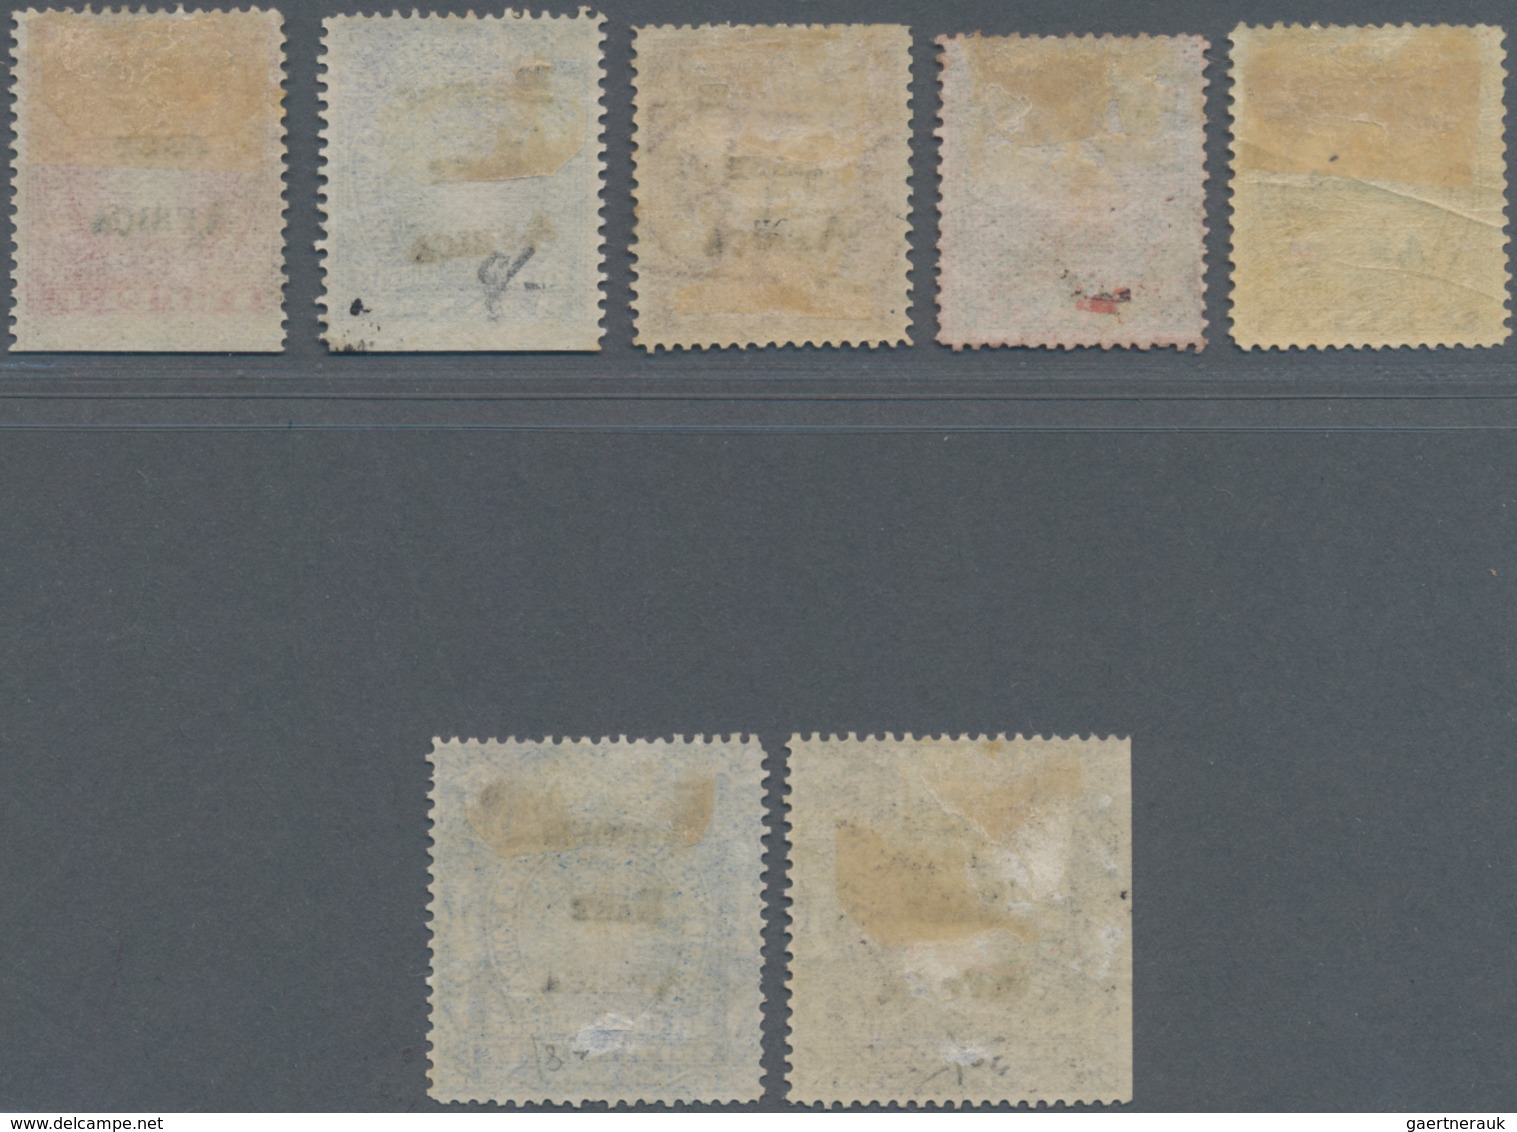 Kenia - Britisch Ostafrika: 1895, Stamps Of B.E.A. Company With Opt. 'BRITISH EAST AFRICA' Part Set - British East Africa